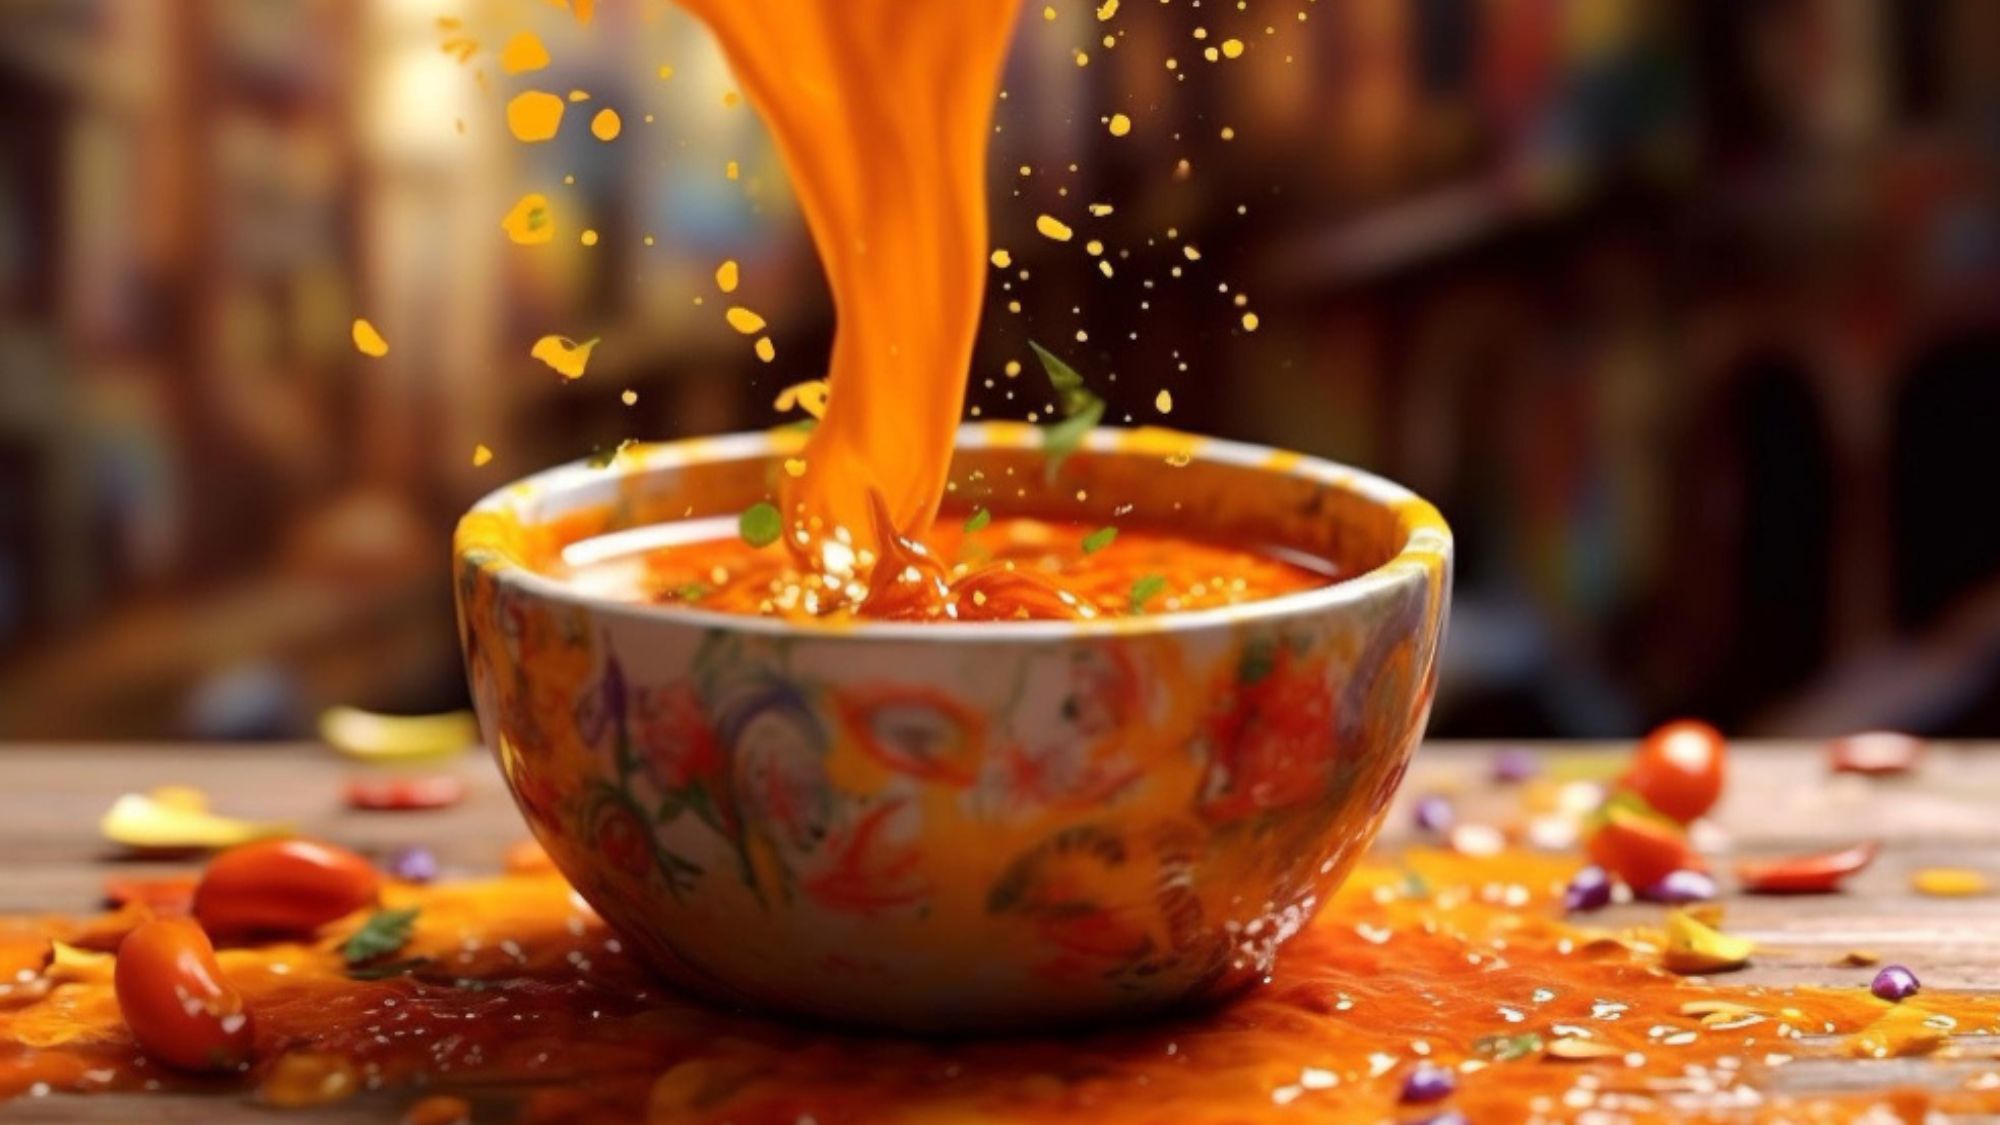 A bowl of delicious Indian curry sauce pouring into it